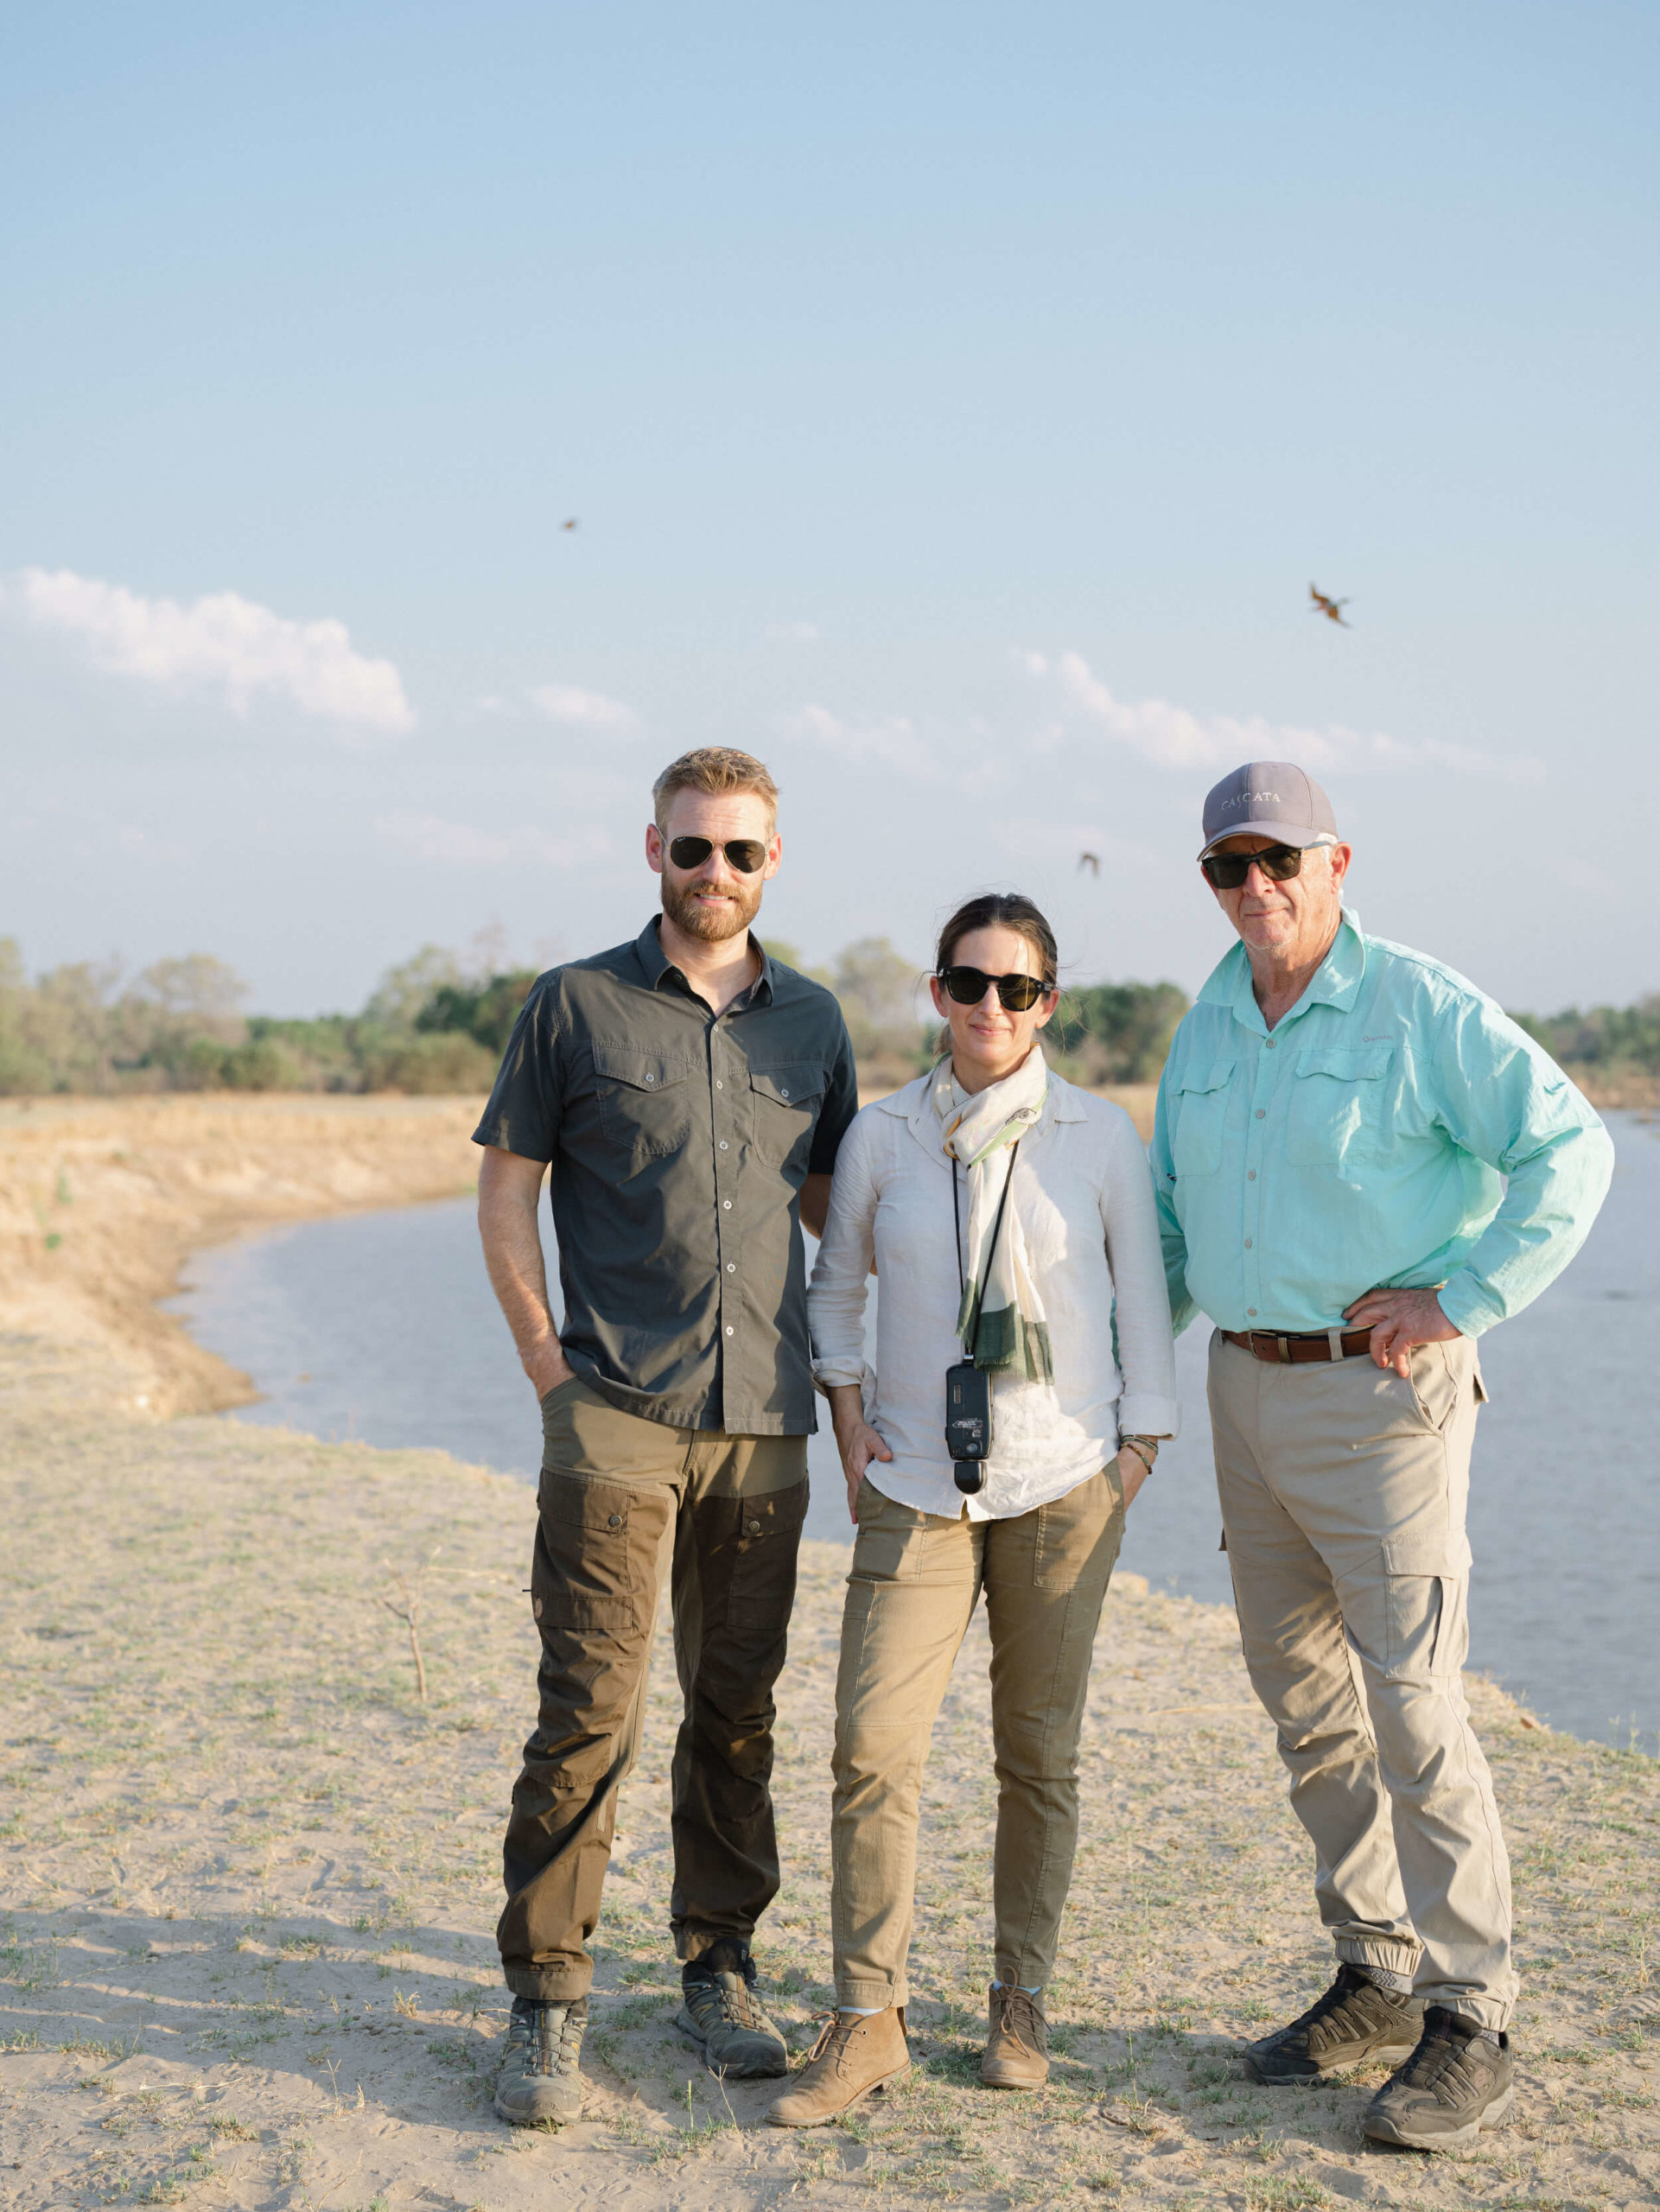 KT Merry and Chad Keffer in Zambia, Africa, on a luxury safari with Time + Tide